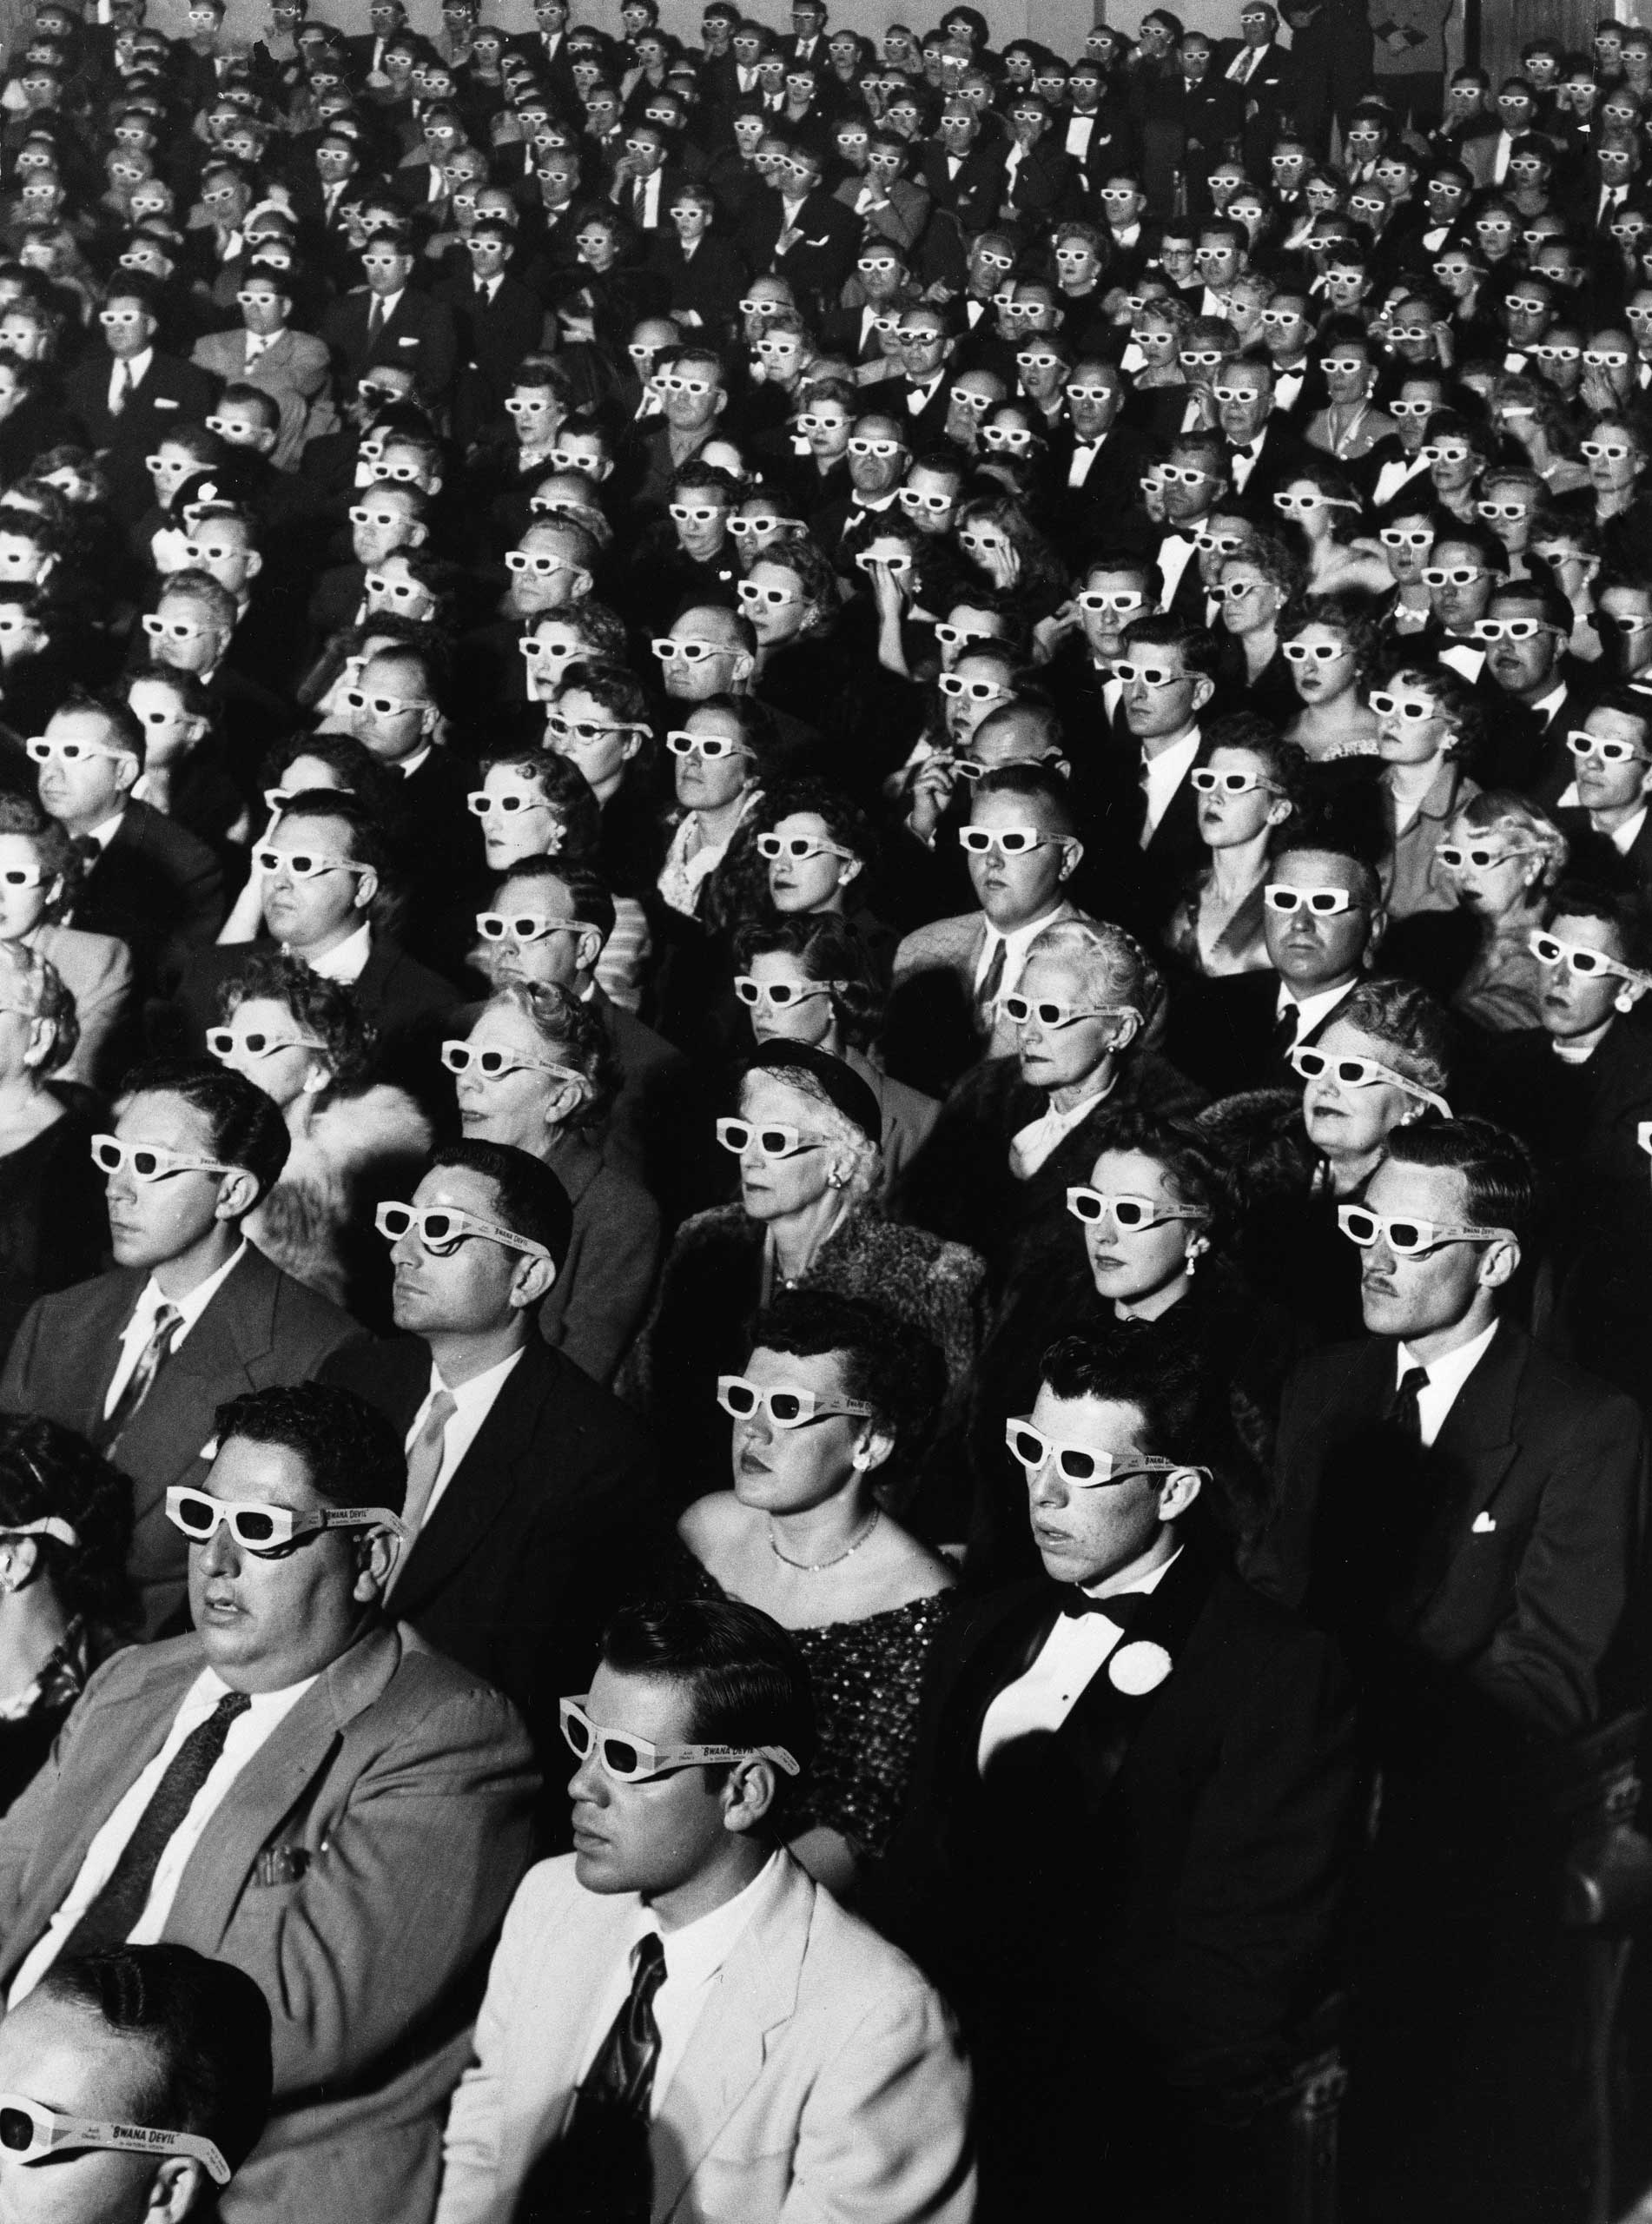 1952 | Riveted audience members enjoy opening night of the first full-length American 3-D feature film: the Arch Oboler-directed drama, Bwana Devil. Originally published in the December 15, 1952, issue of LIFE.